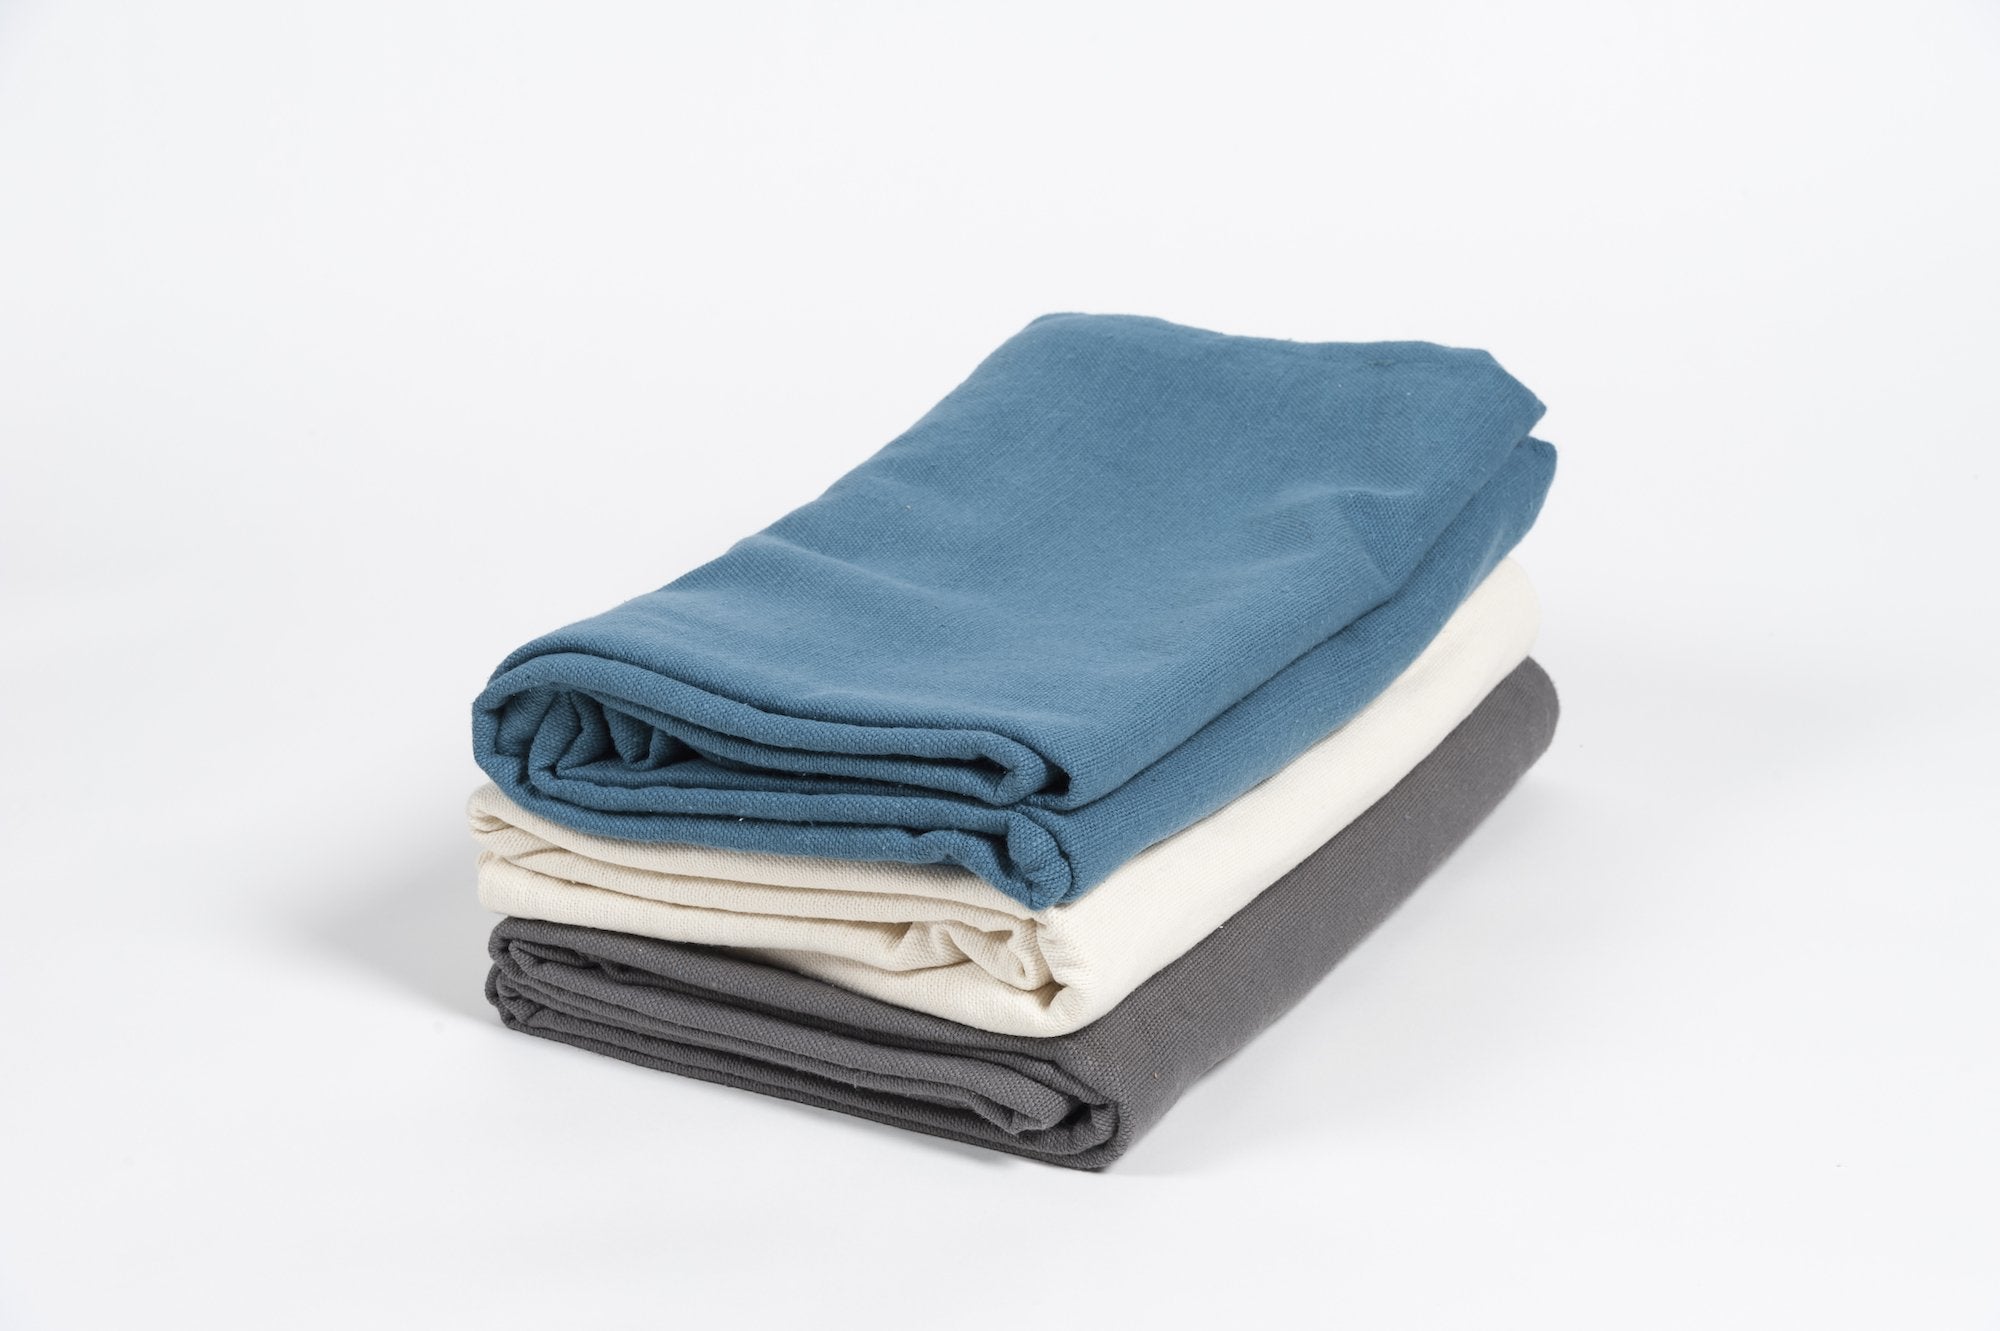 stack of three yoga blankets, blue, ocean and grey